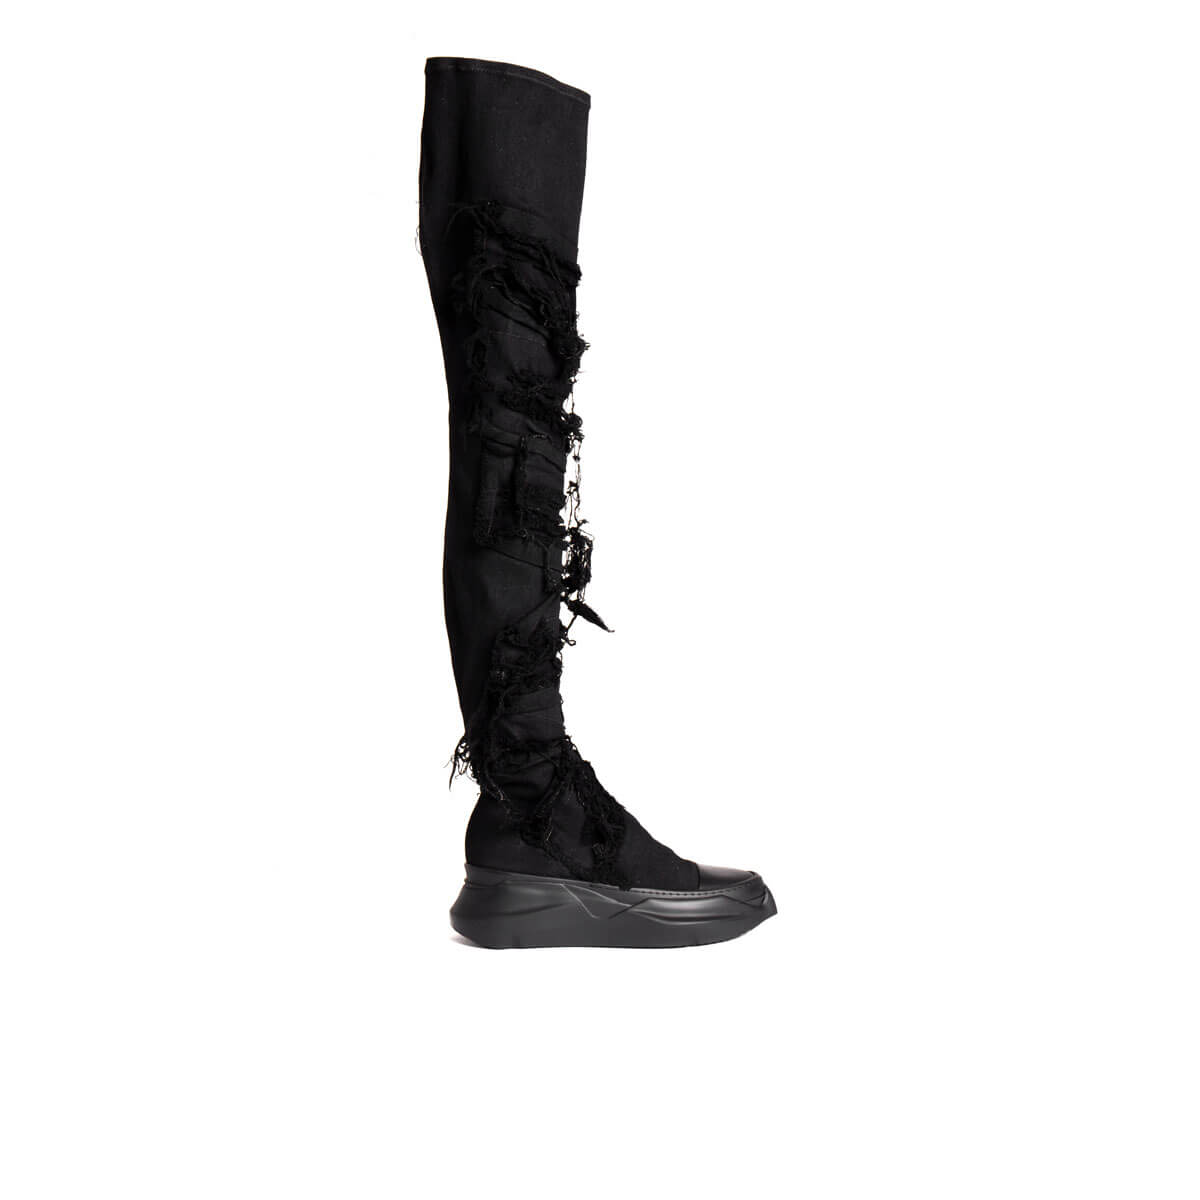 DRKSHDW Abstract Stockings Boots